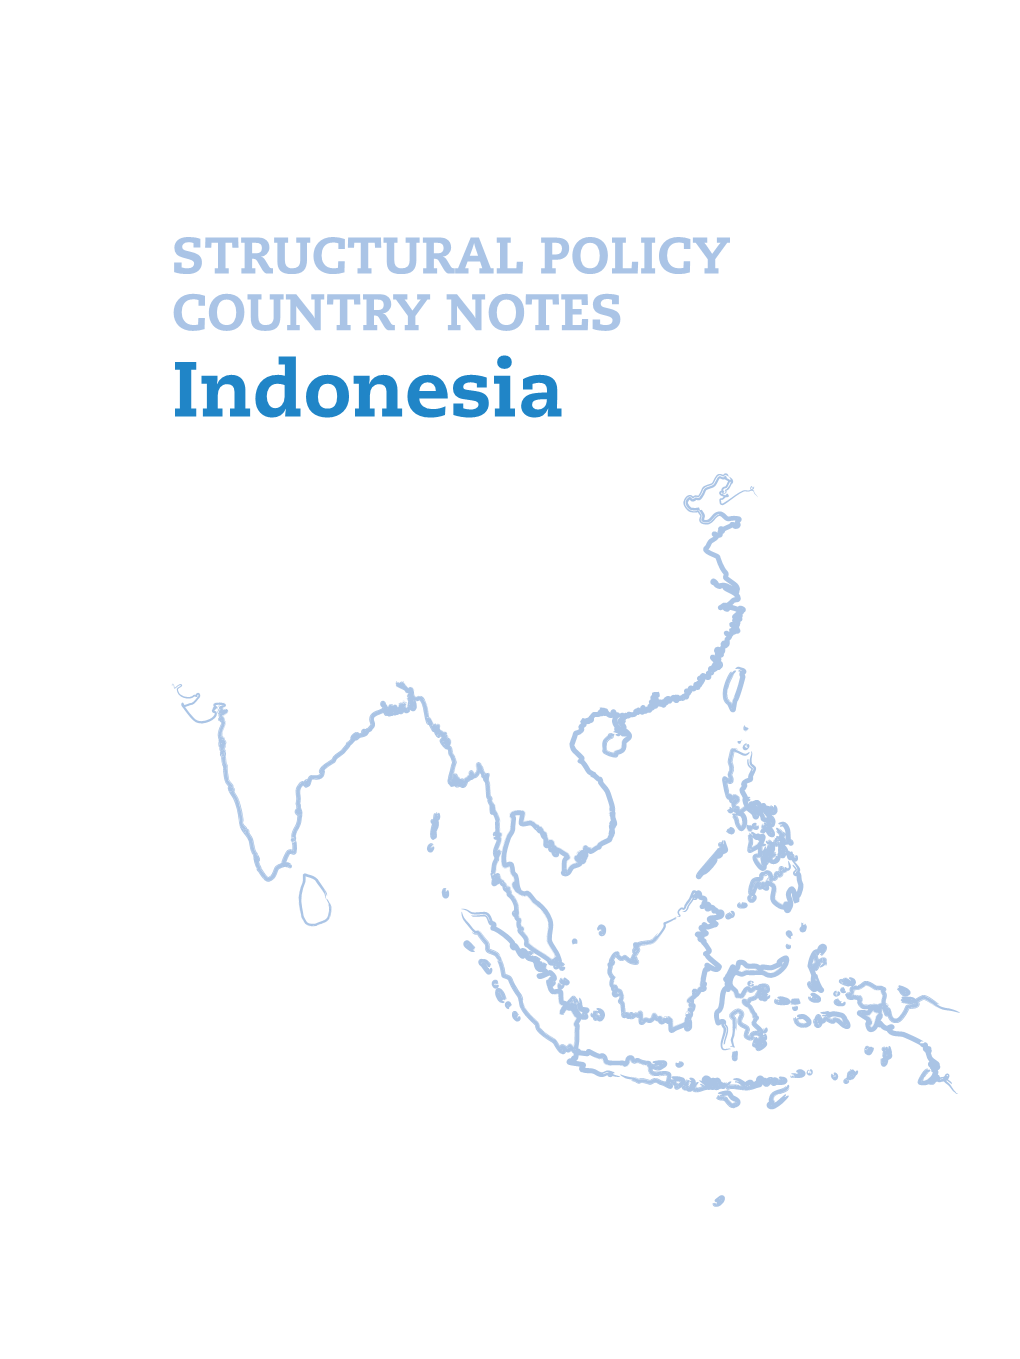 Indonesia Structural Policy Challenges for SOUTHEAST ASIAN COUNTRIES